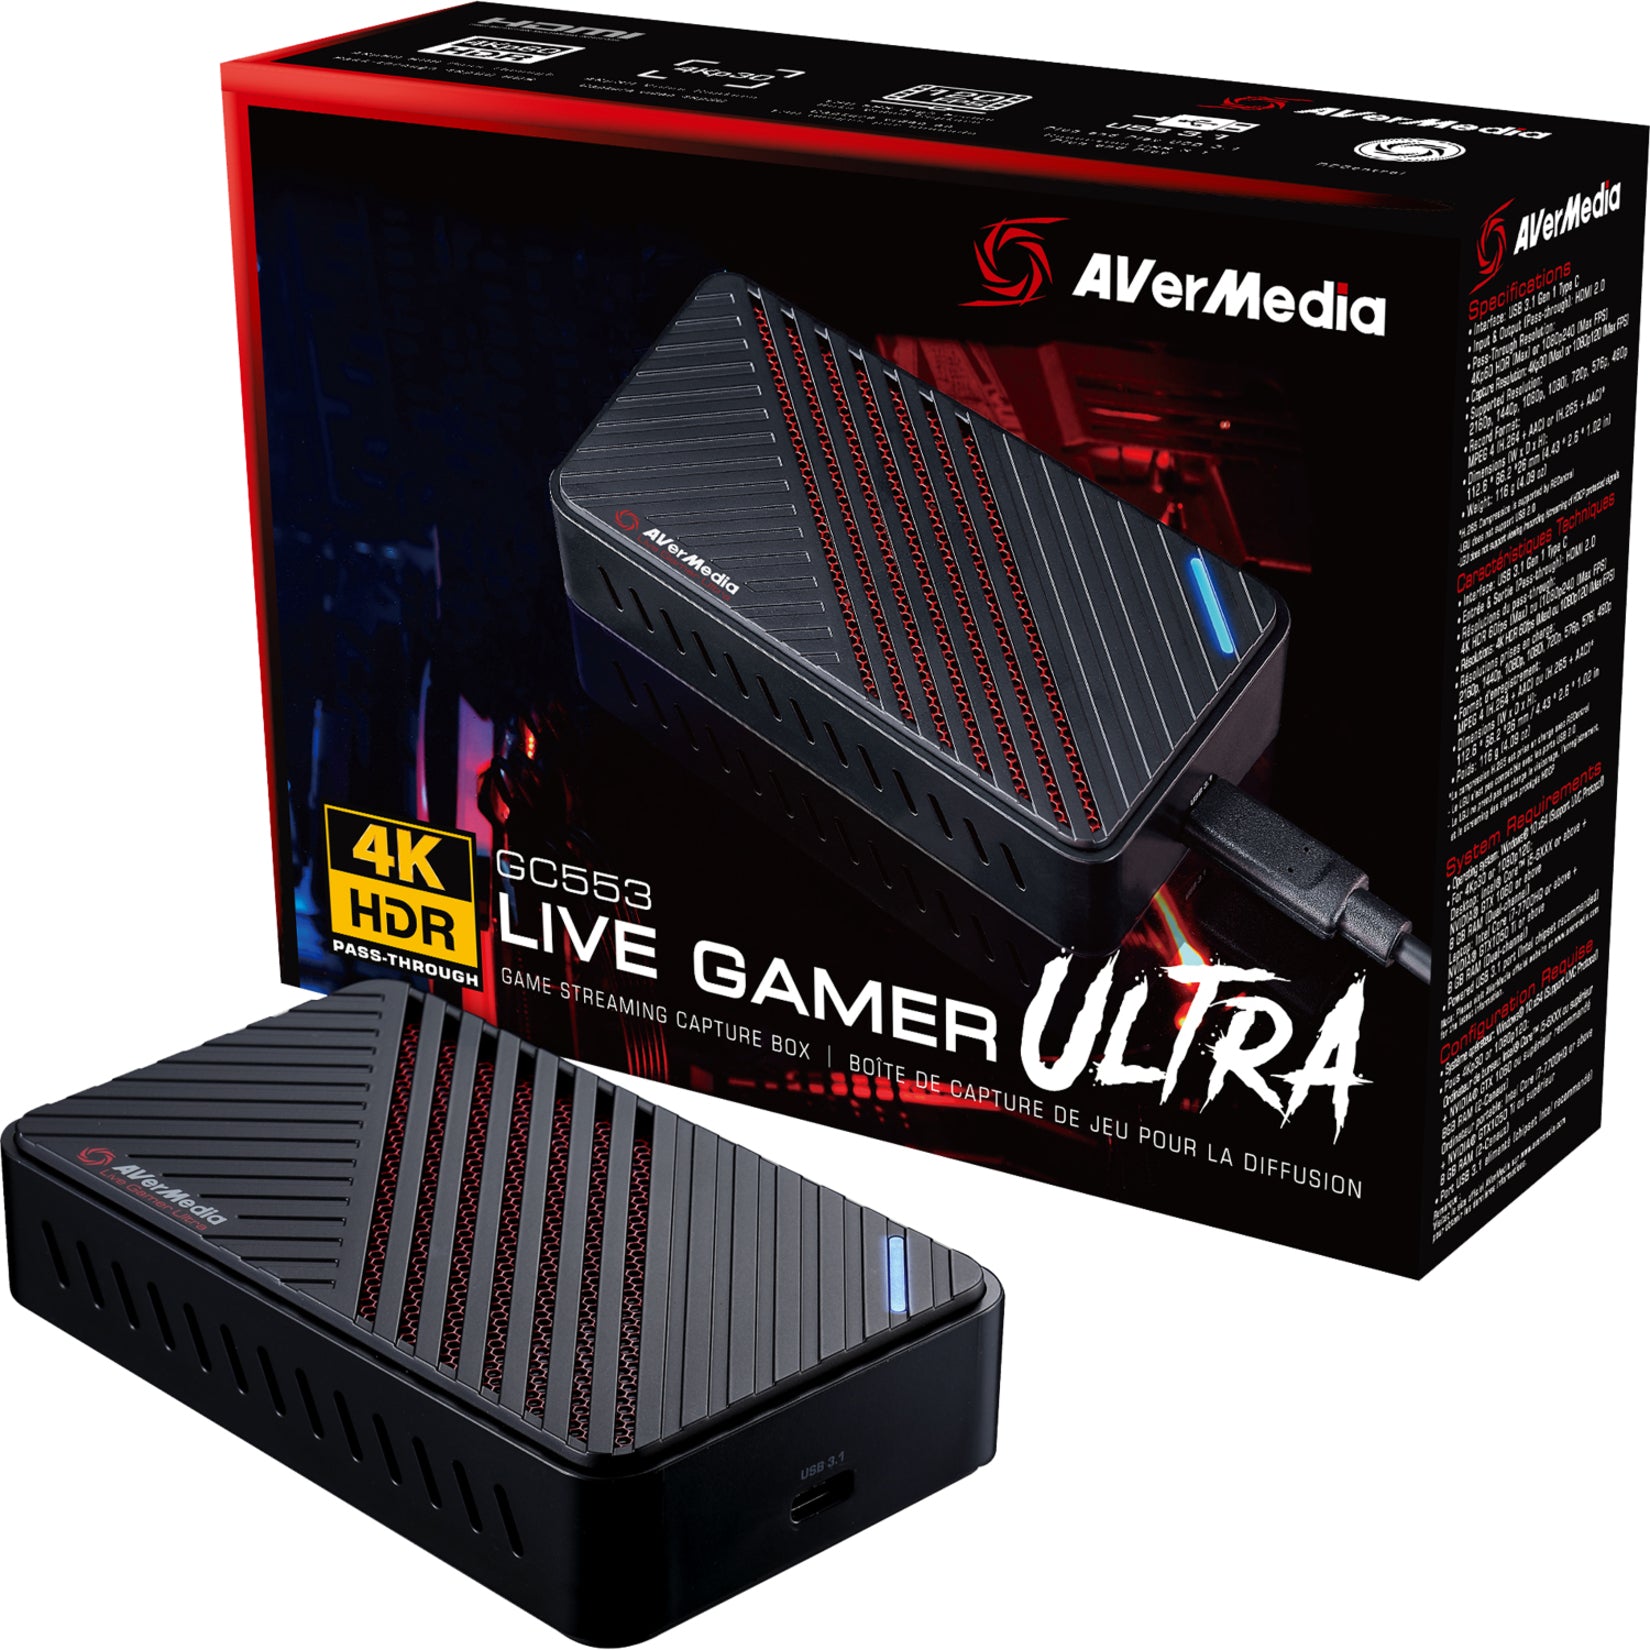 AVerMedia GC553 Live Gamer Ultra Game Capturing Device, Video Streaming, Video Recording